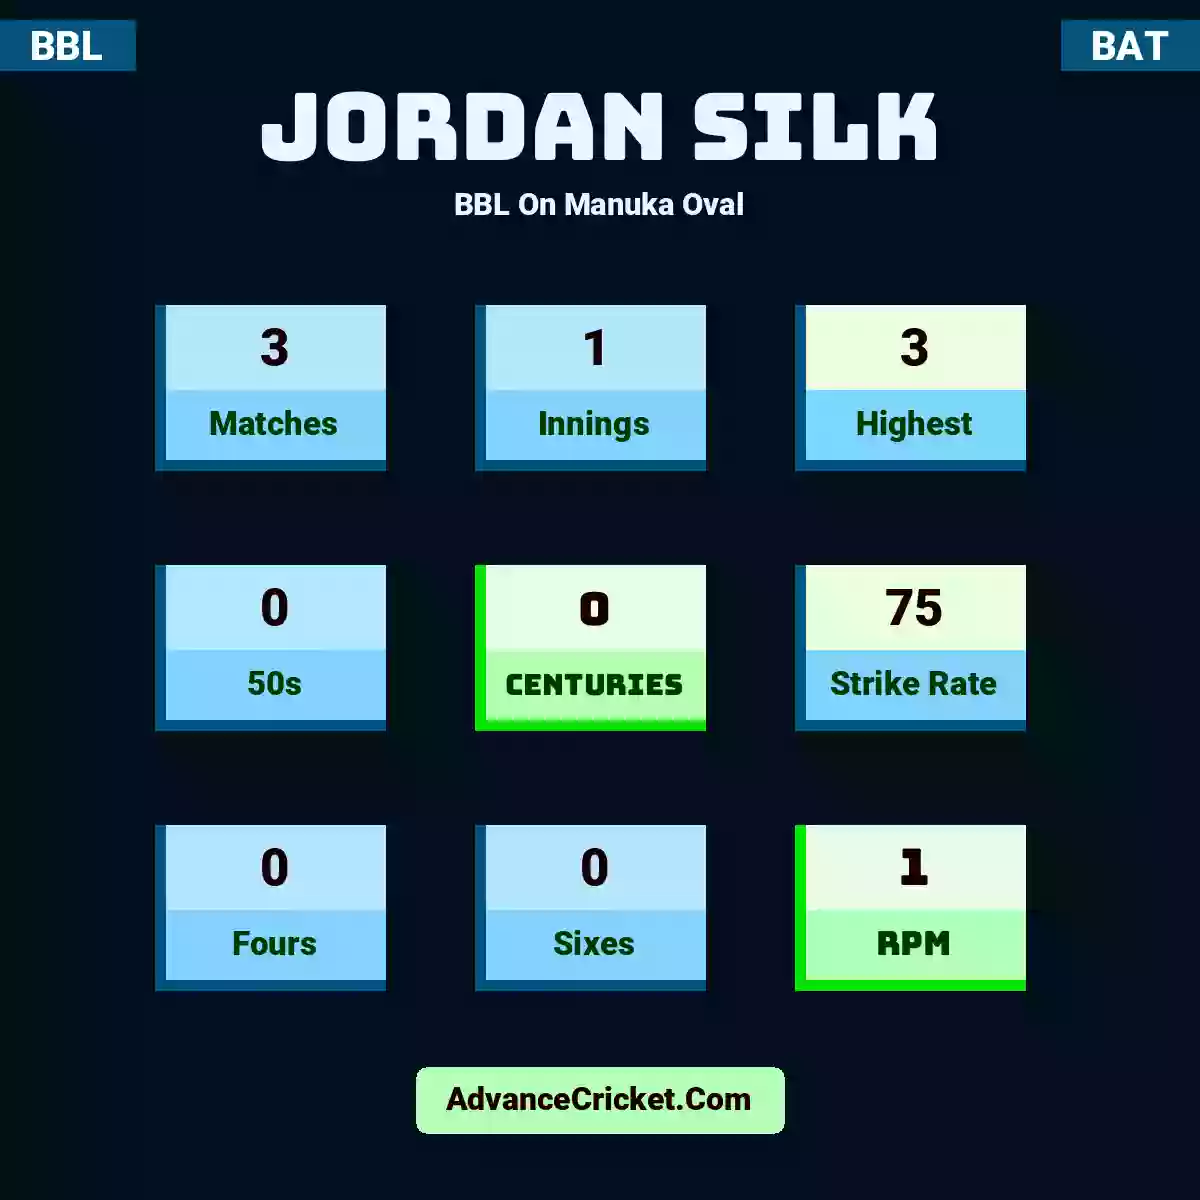 Jordan Silk BBL  On Manuka Oval, Jordan Silk played 3 matches, scored 3 runs as highest, 0 half-centuries, and 0 centuries, with a strike rate of 75. J.Silk hit 0 fours and 0 sixes, with an RPM of 1.